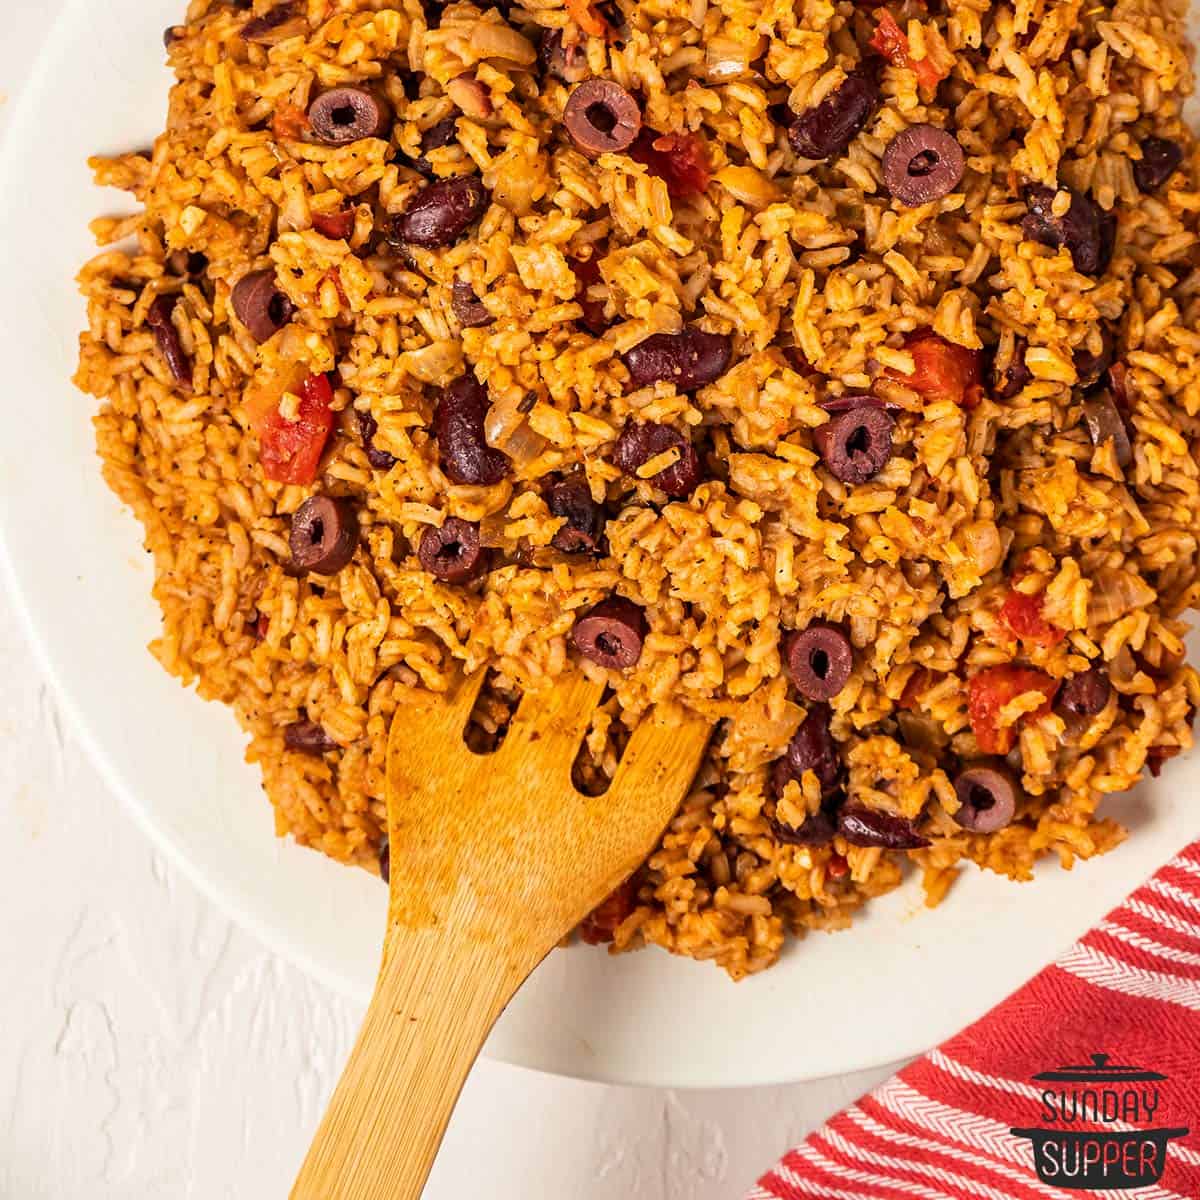 a wooden spoon digging into a plate of spanish rice and beans